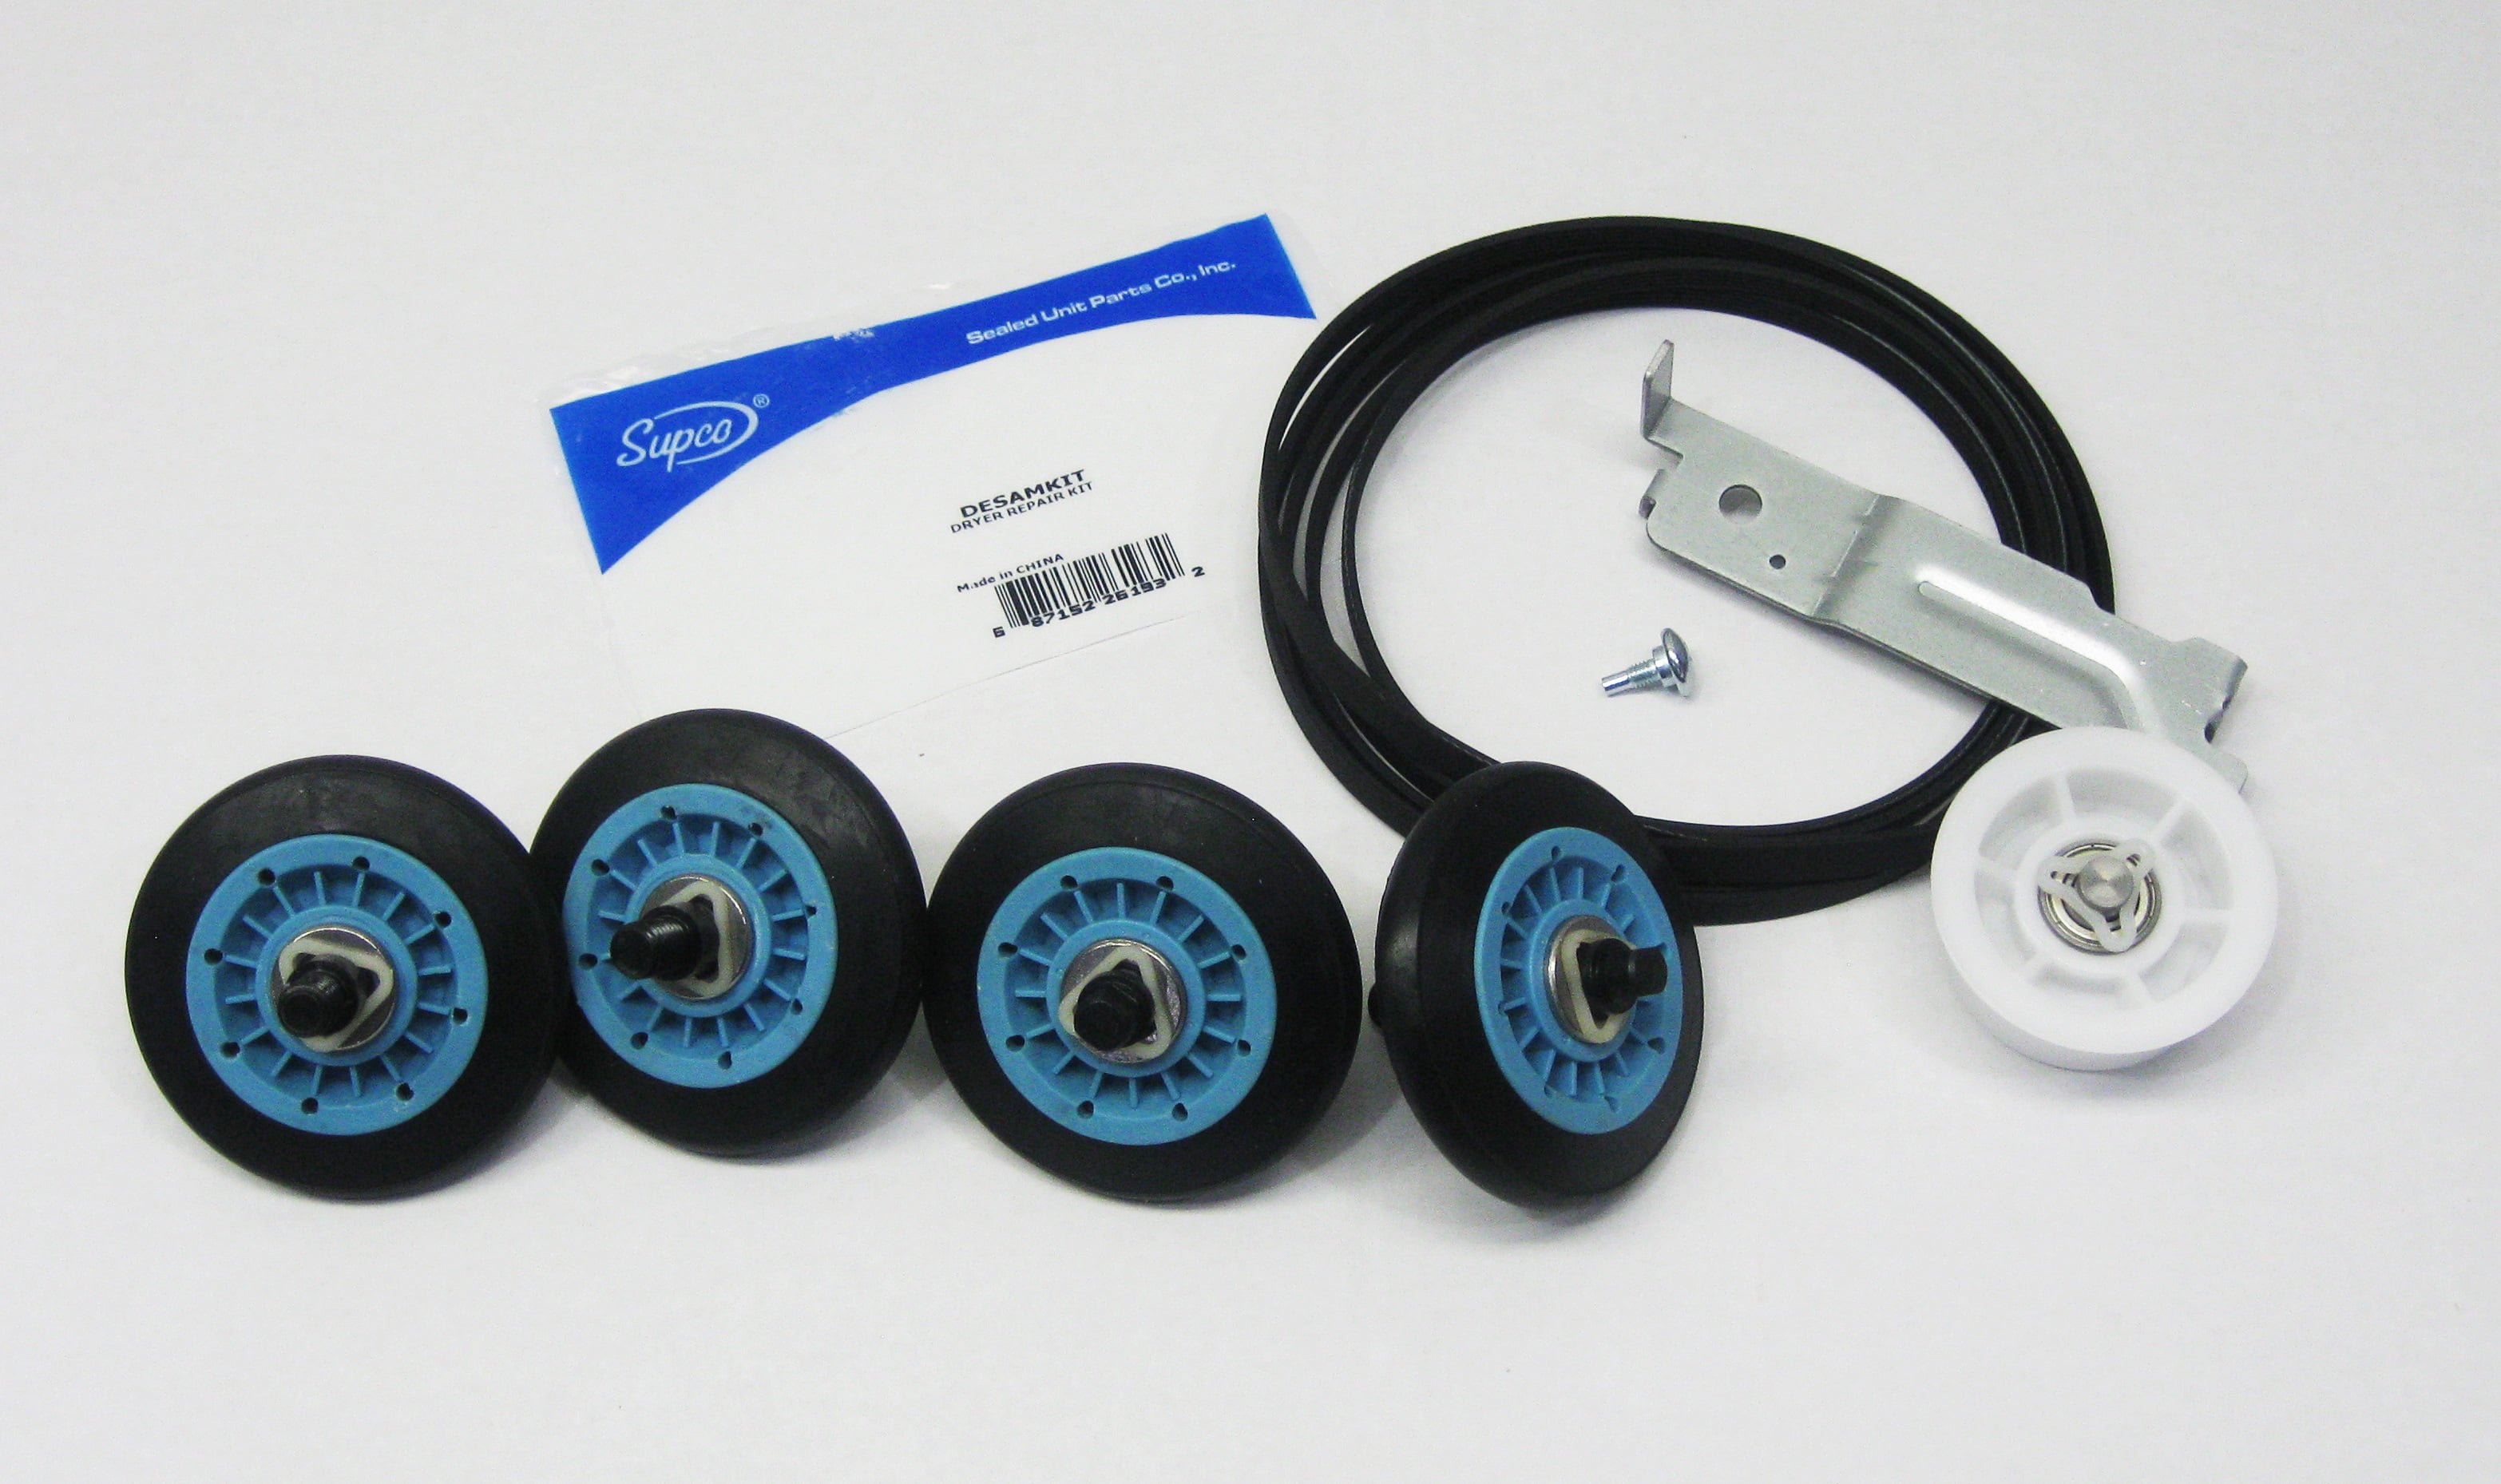 ROLLERS AND IDLER PULLEY *FACTORY SEALED* CABRIO DRYER REPAIR KIT INCLUDES BELT 